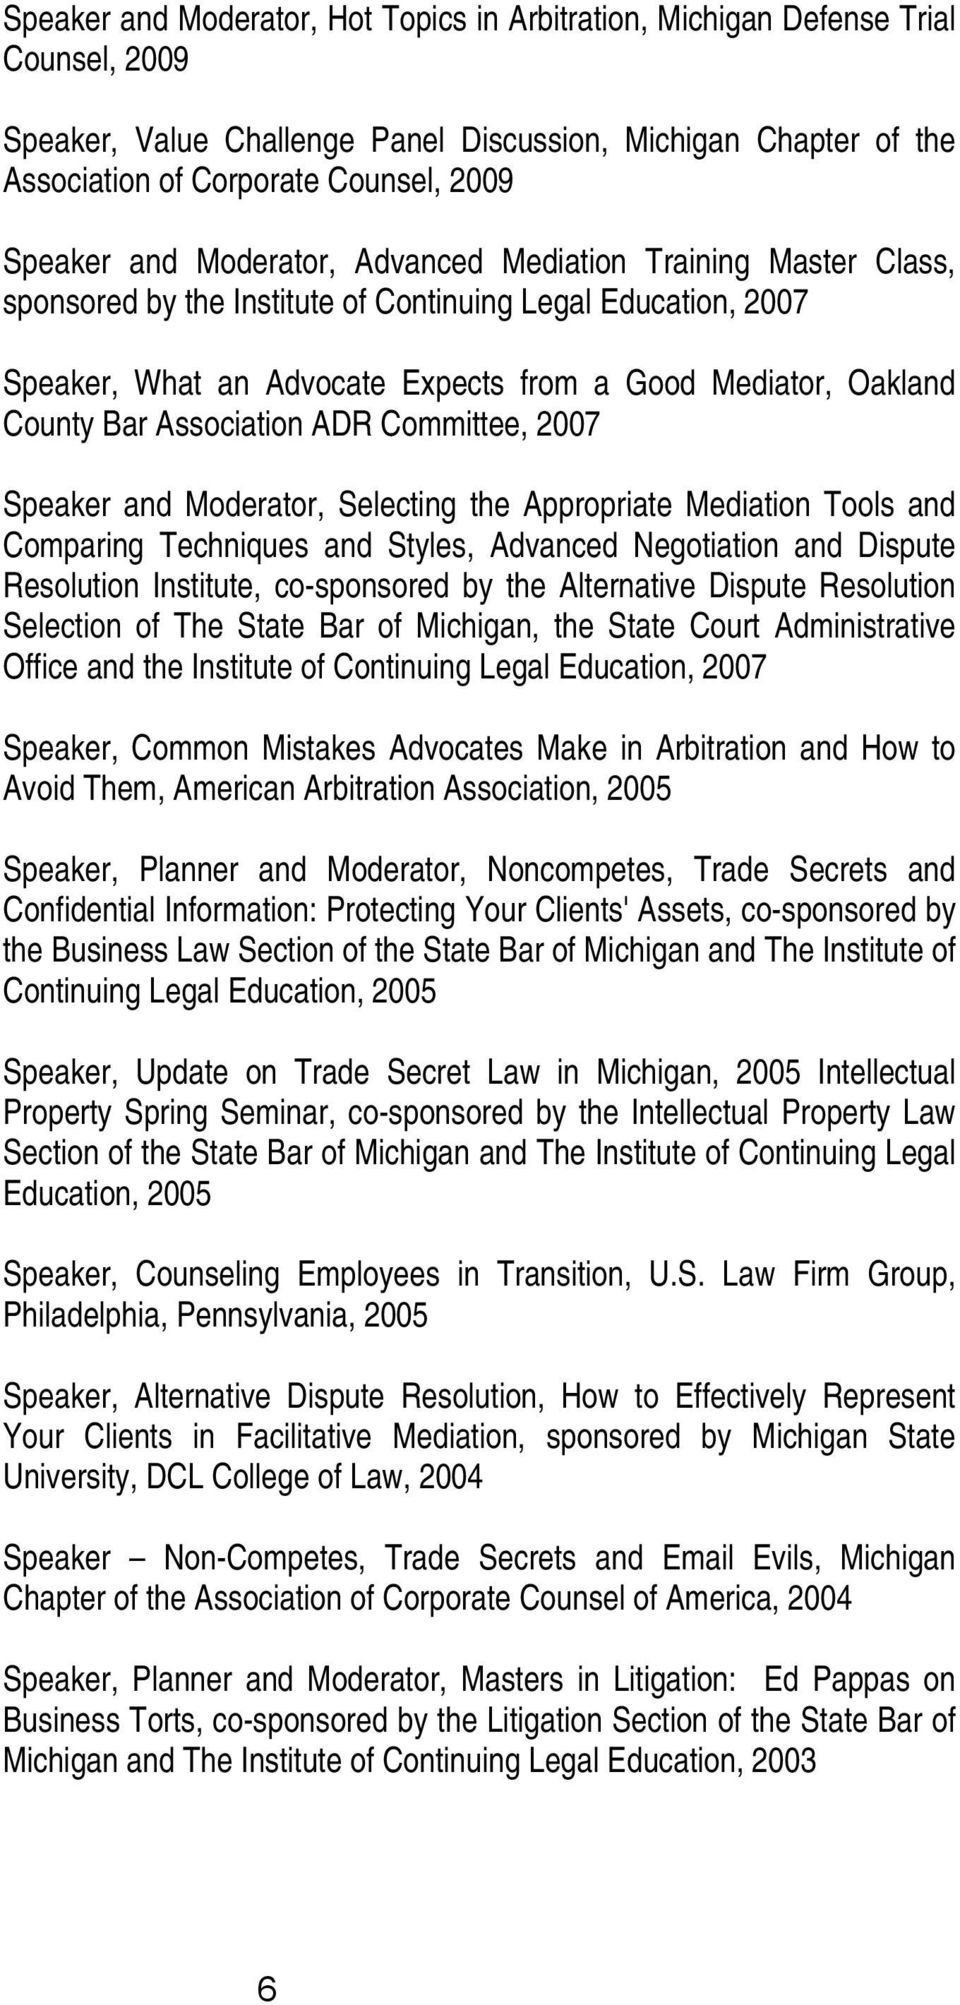 Bar Association ADR Committee, 2007 Speaker and Moderator, Selecting the Appropriate Mediation Tools and Comparing Techniques and Styles, Advanced Negotiation and Dispute Resolution Institute,